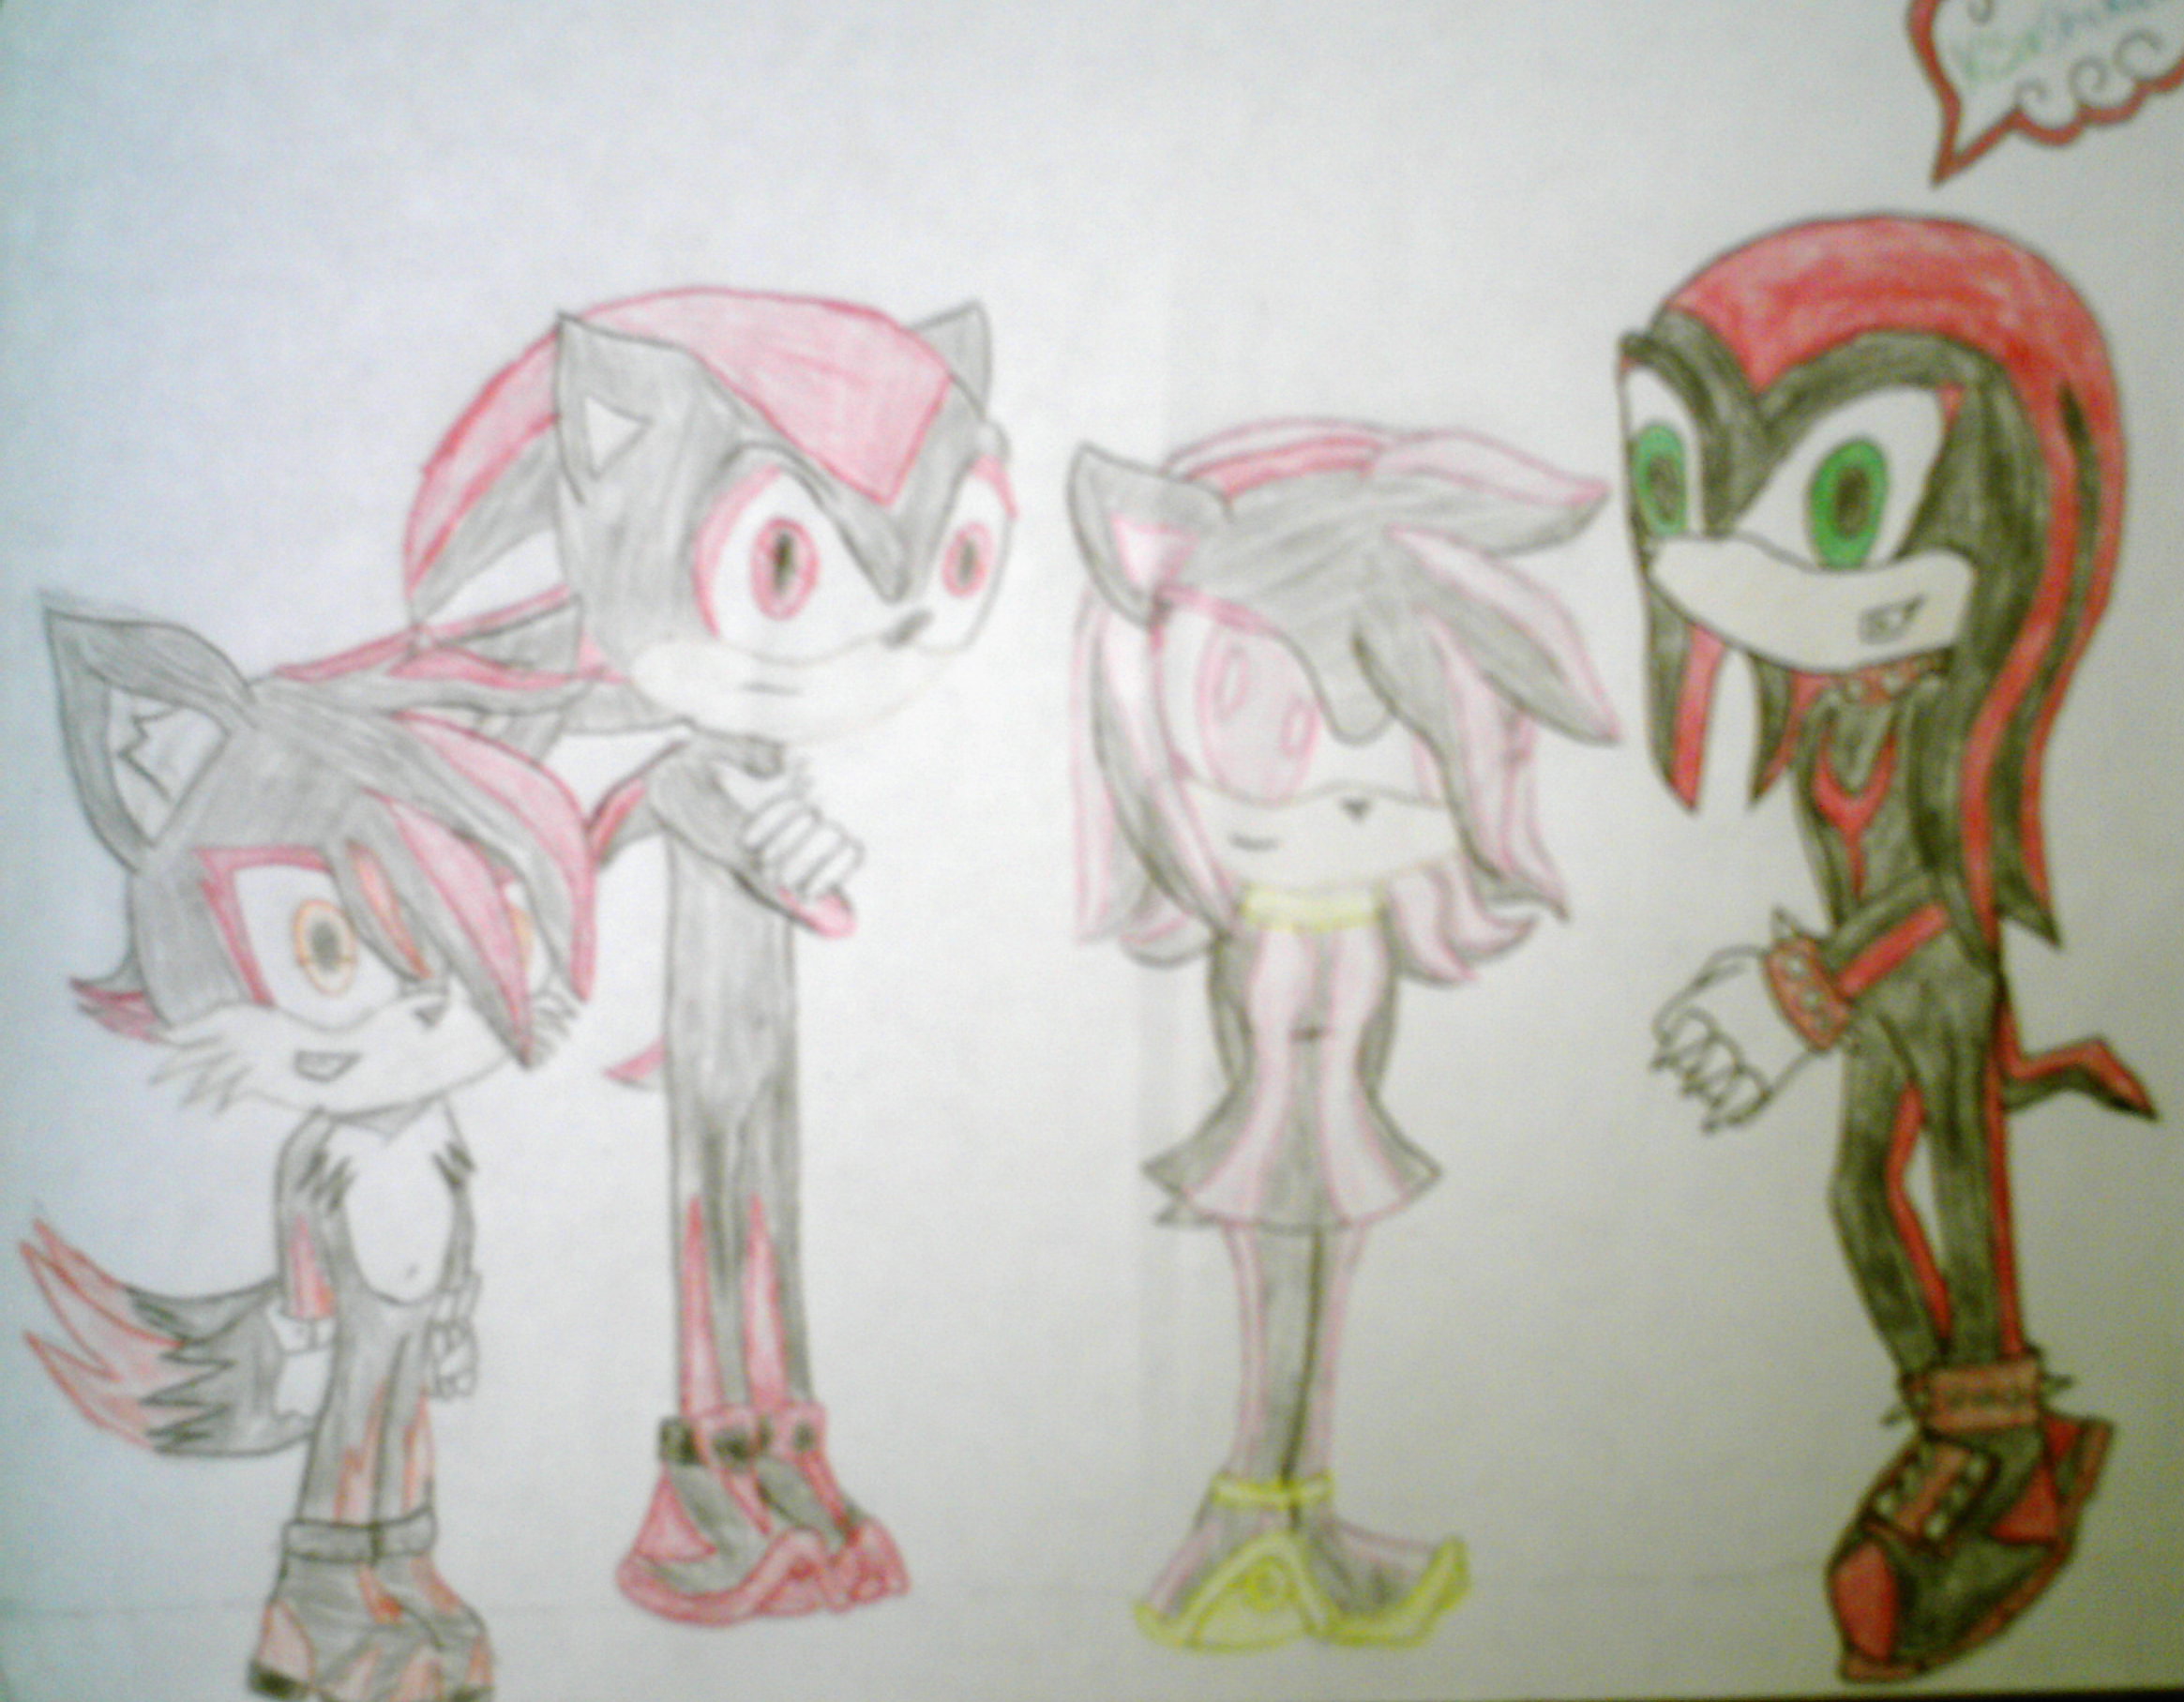 The Shadow Alliance- First drawing by KisaShika